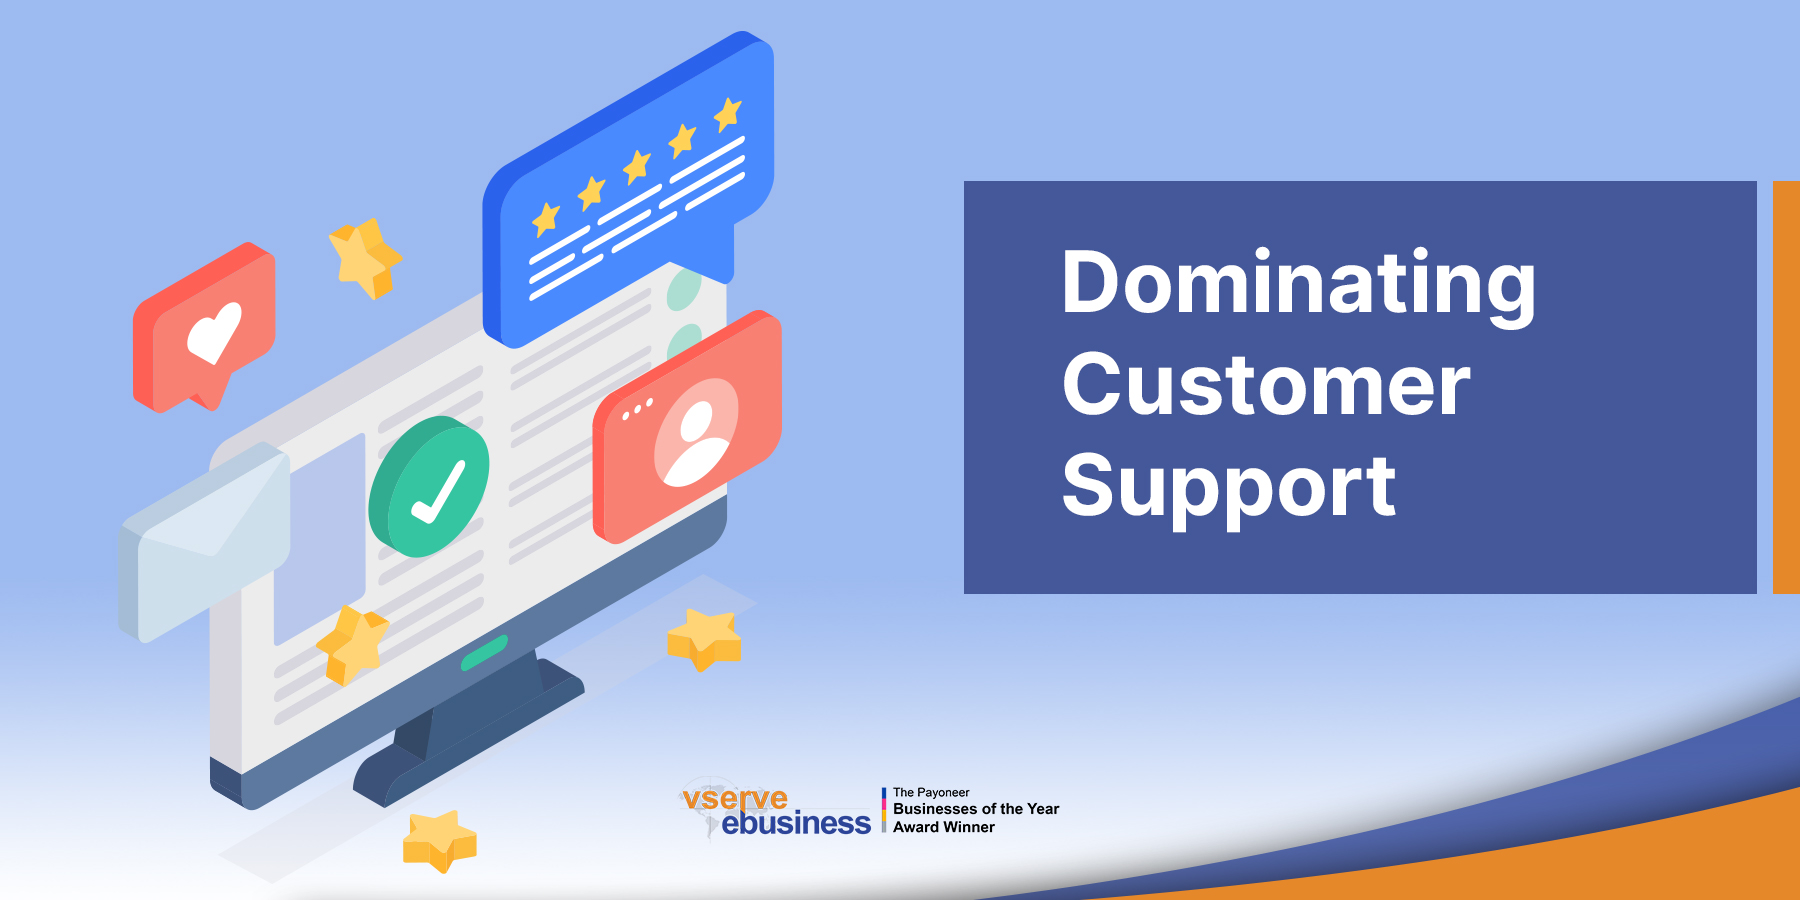 The eCommerce of Consumer Convenience Top Customer Support Tips to Dominate It